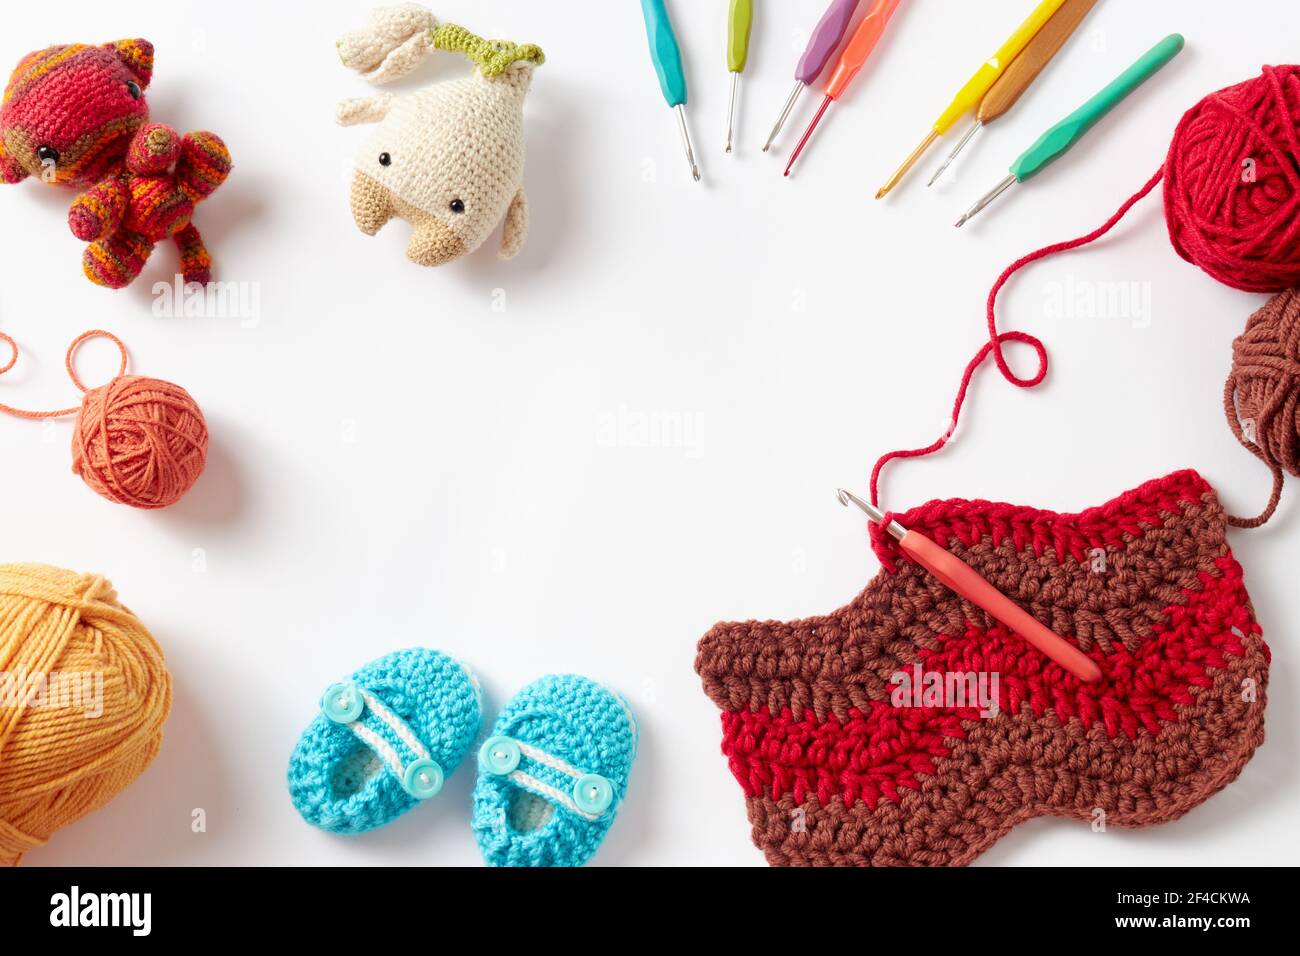 Colorful crochet project with hook and yarn, on white background. Stock Photo